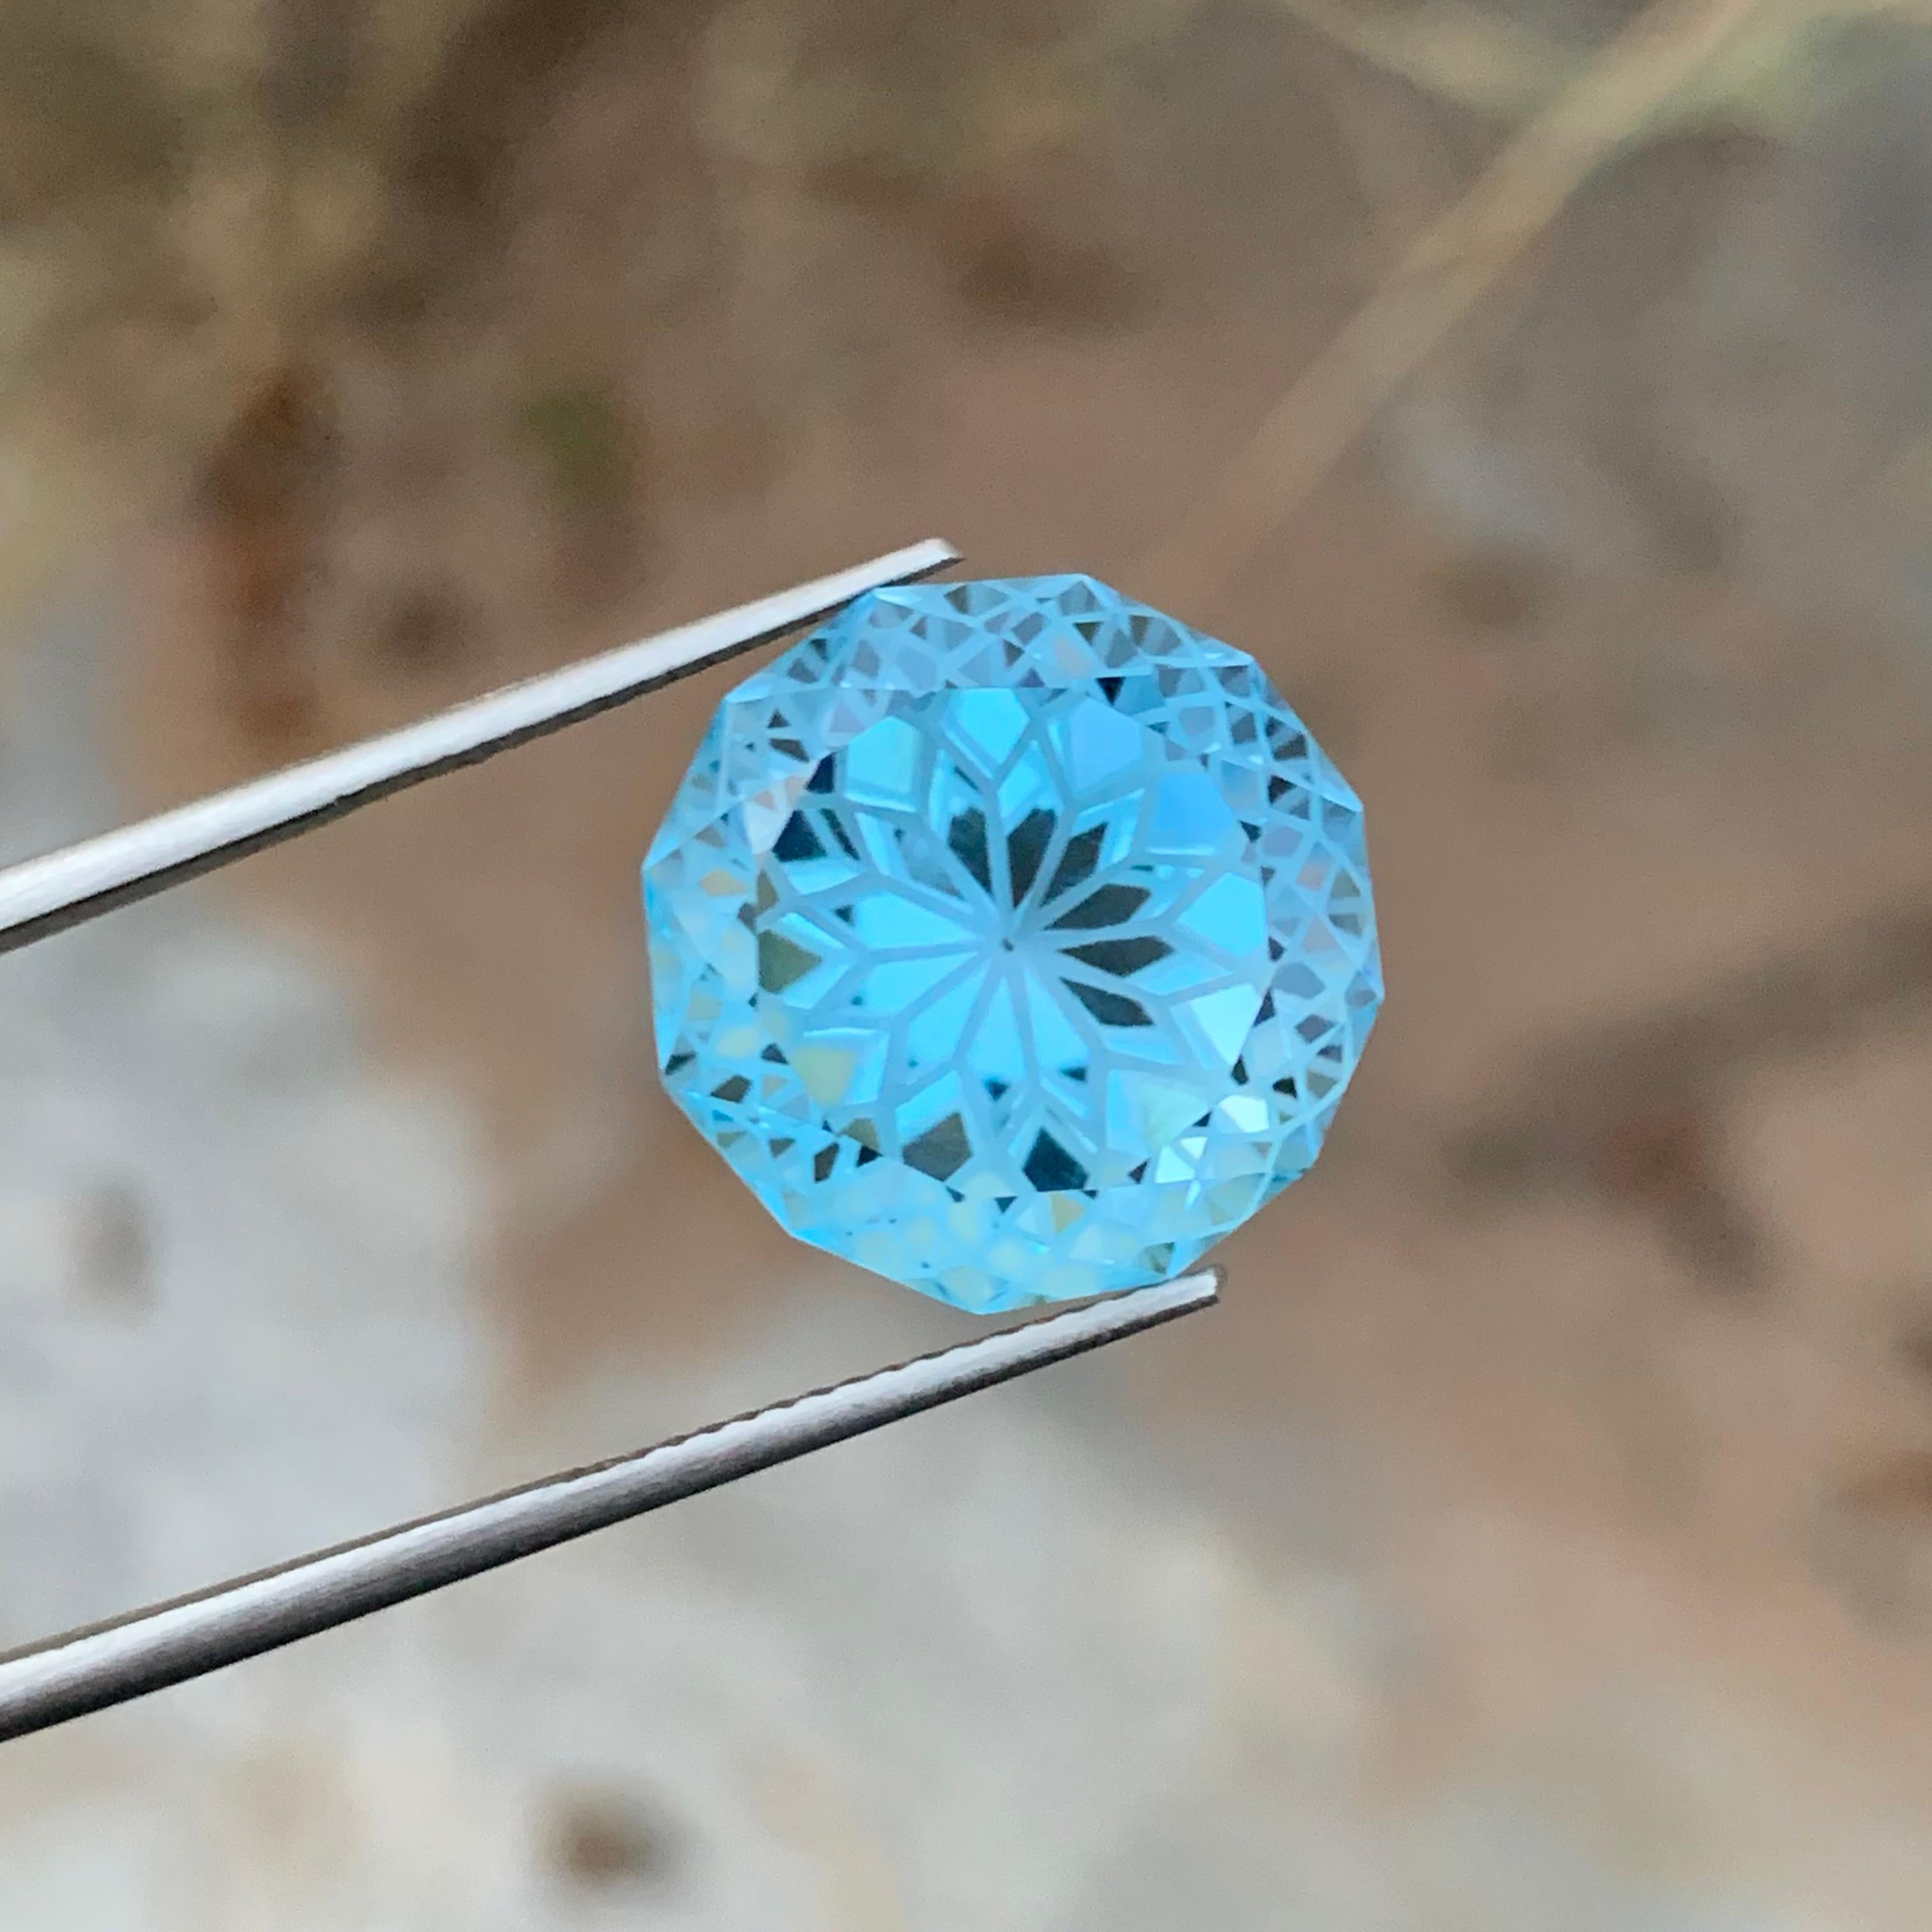 Captivating 19.65 Carats of Round Flower Cut Blue Topaz Gemstone Jewelry Making For Sale 8